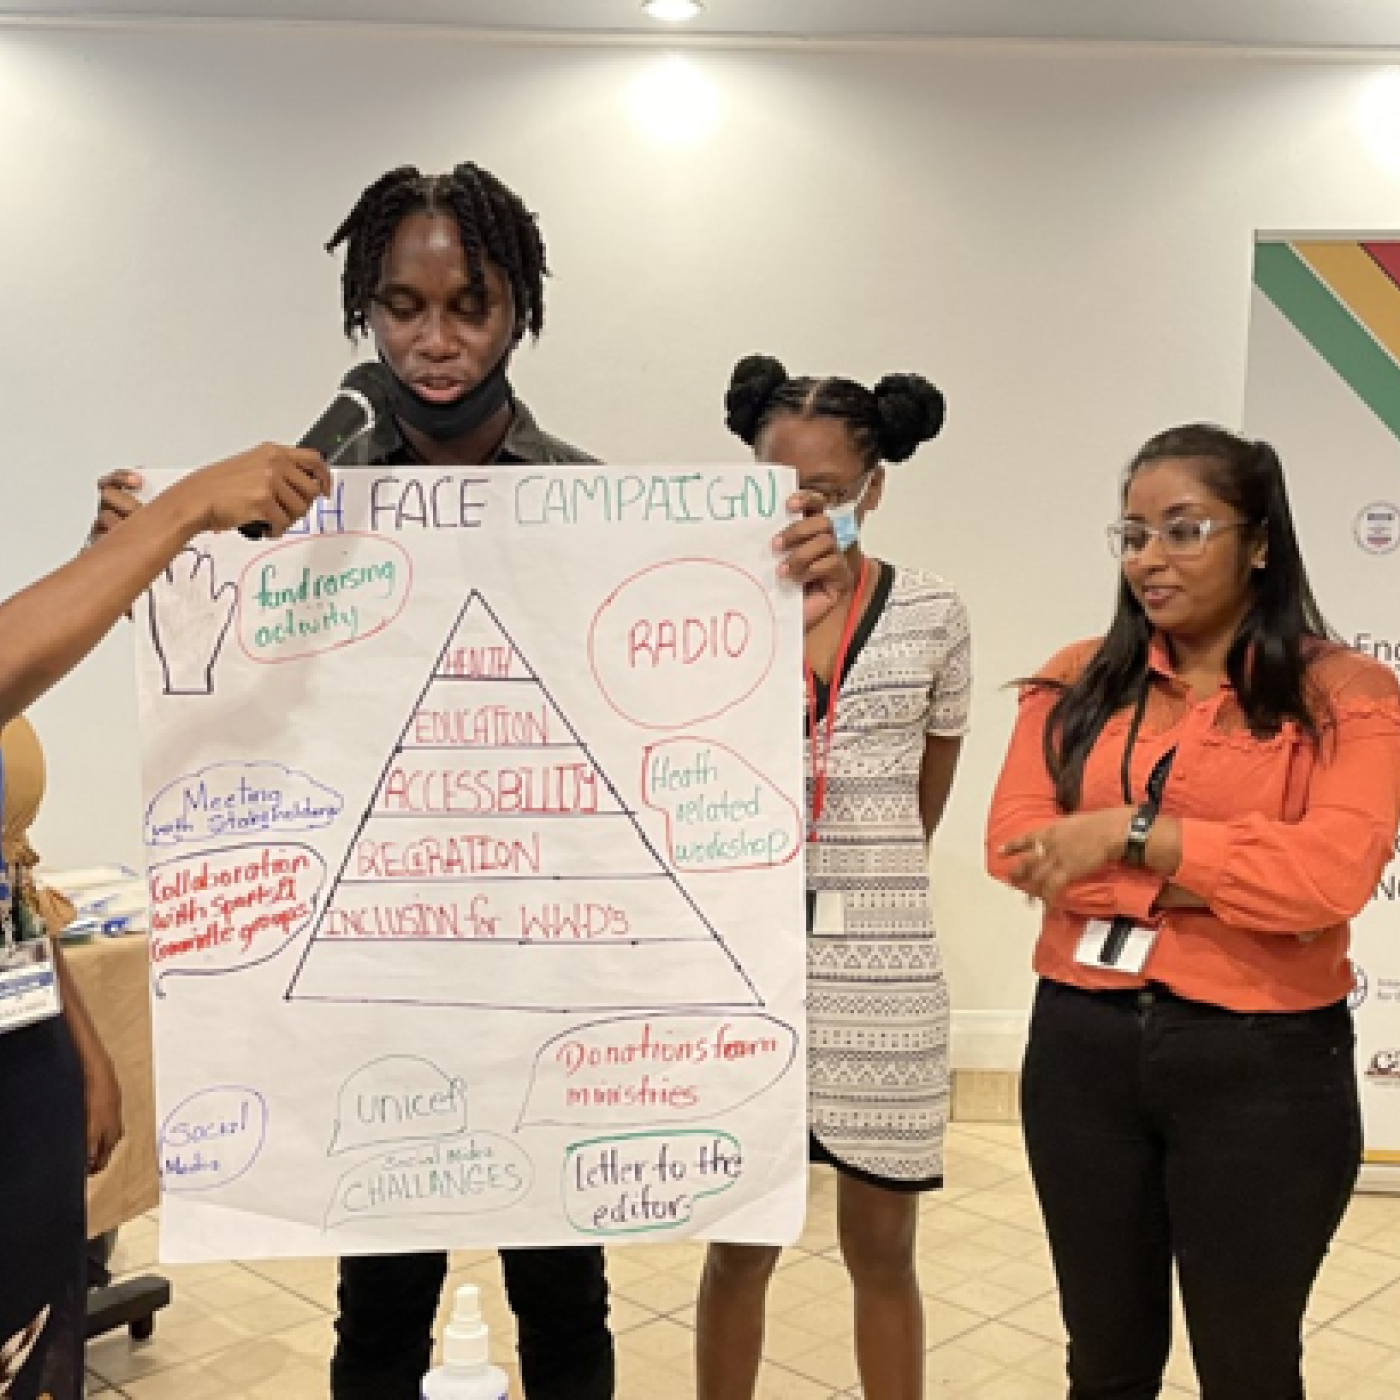 Five young participants of IFES Guyana's ENGAGE program present their work to their peers. A participant is holding the microphone up to another participant holding a poster board as their teammates listen.